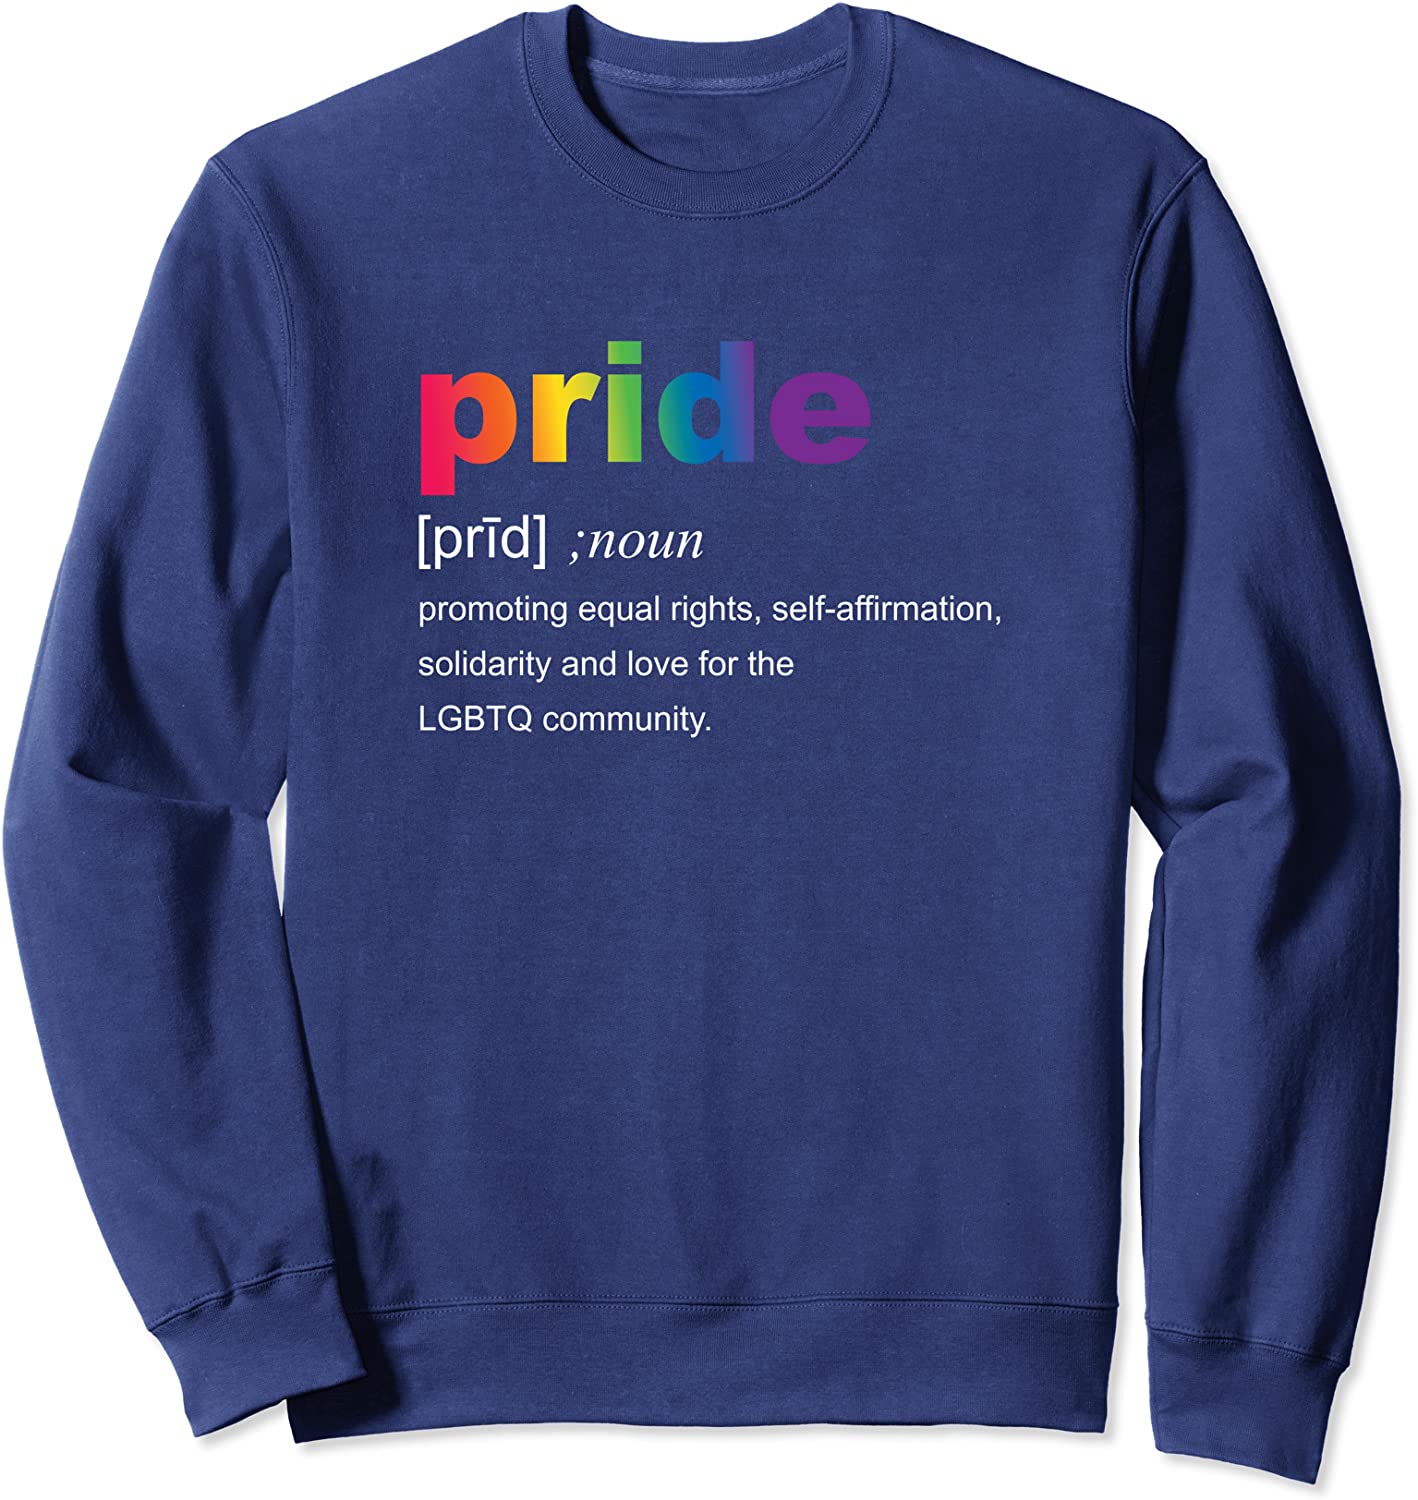 Pride Definition Sweatshirt - 49.99 with free shipping on Gays+ Store 